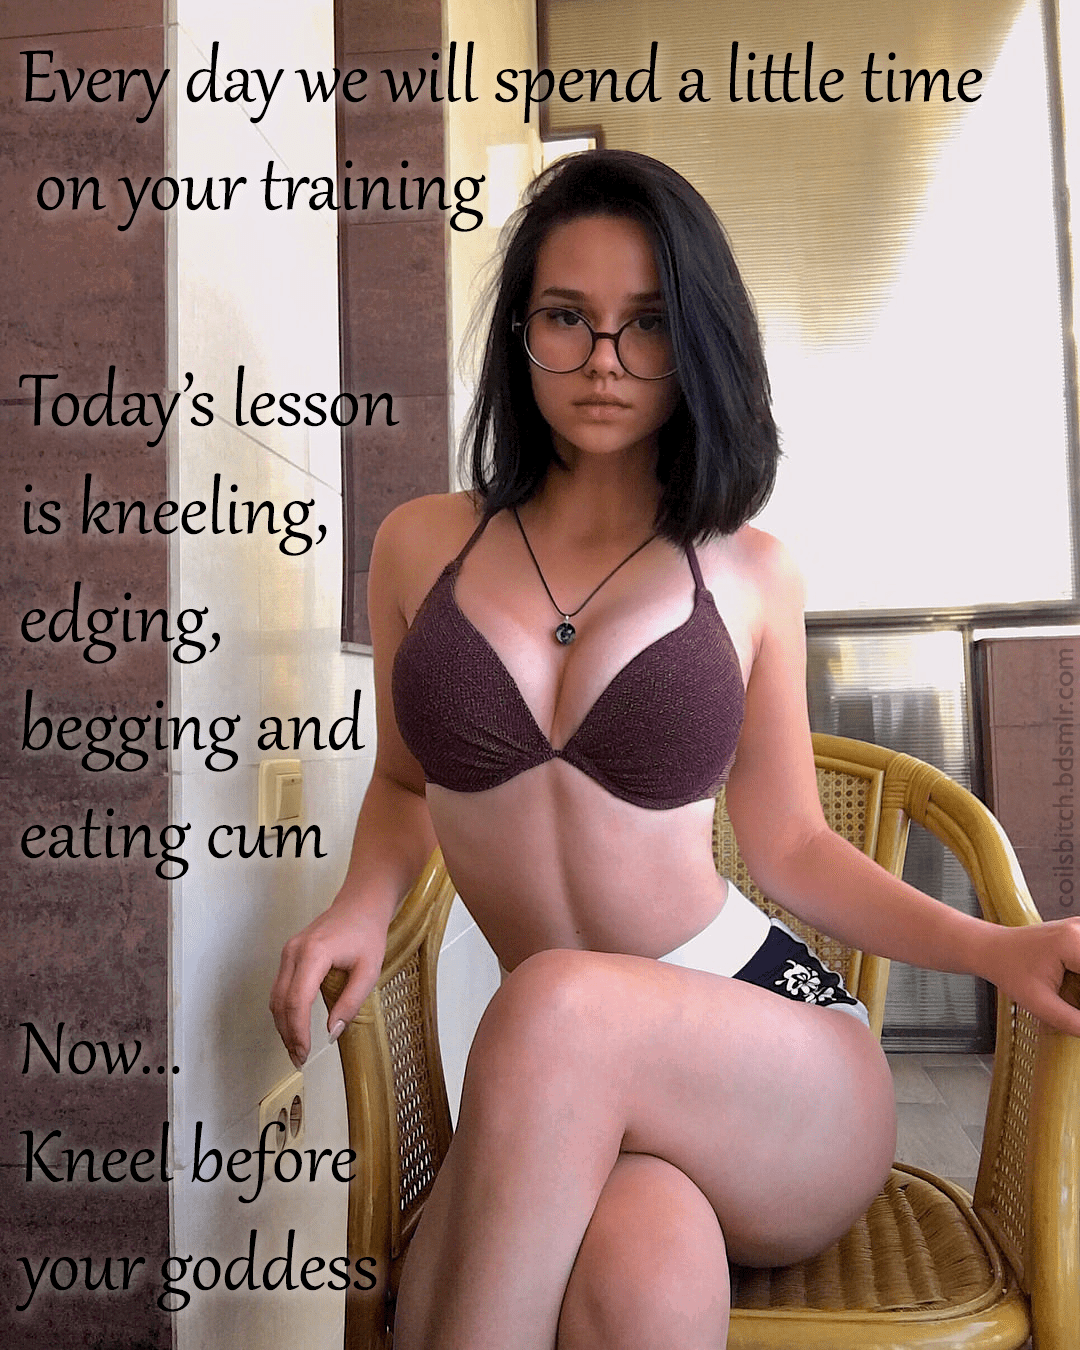 Watch the Photo by SissyCaptions with the username @SissyCaptions, posted on January 17, 2021. The post is about the topic Sissy Captions.